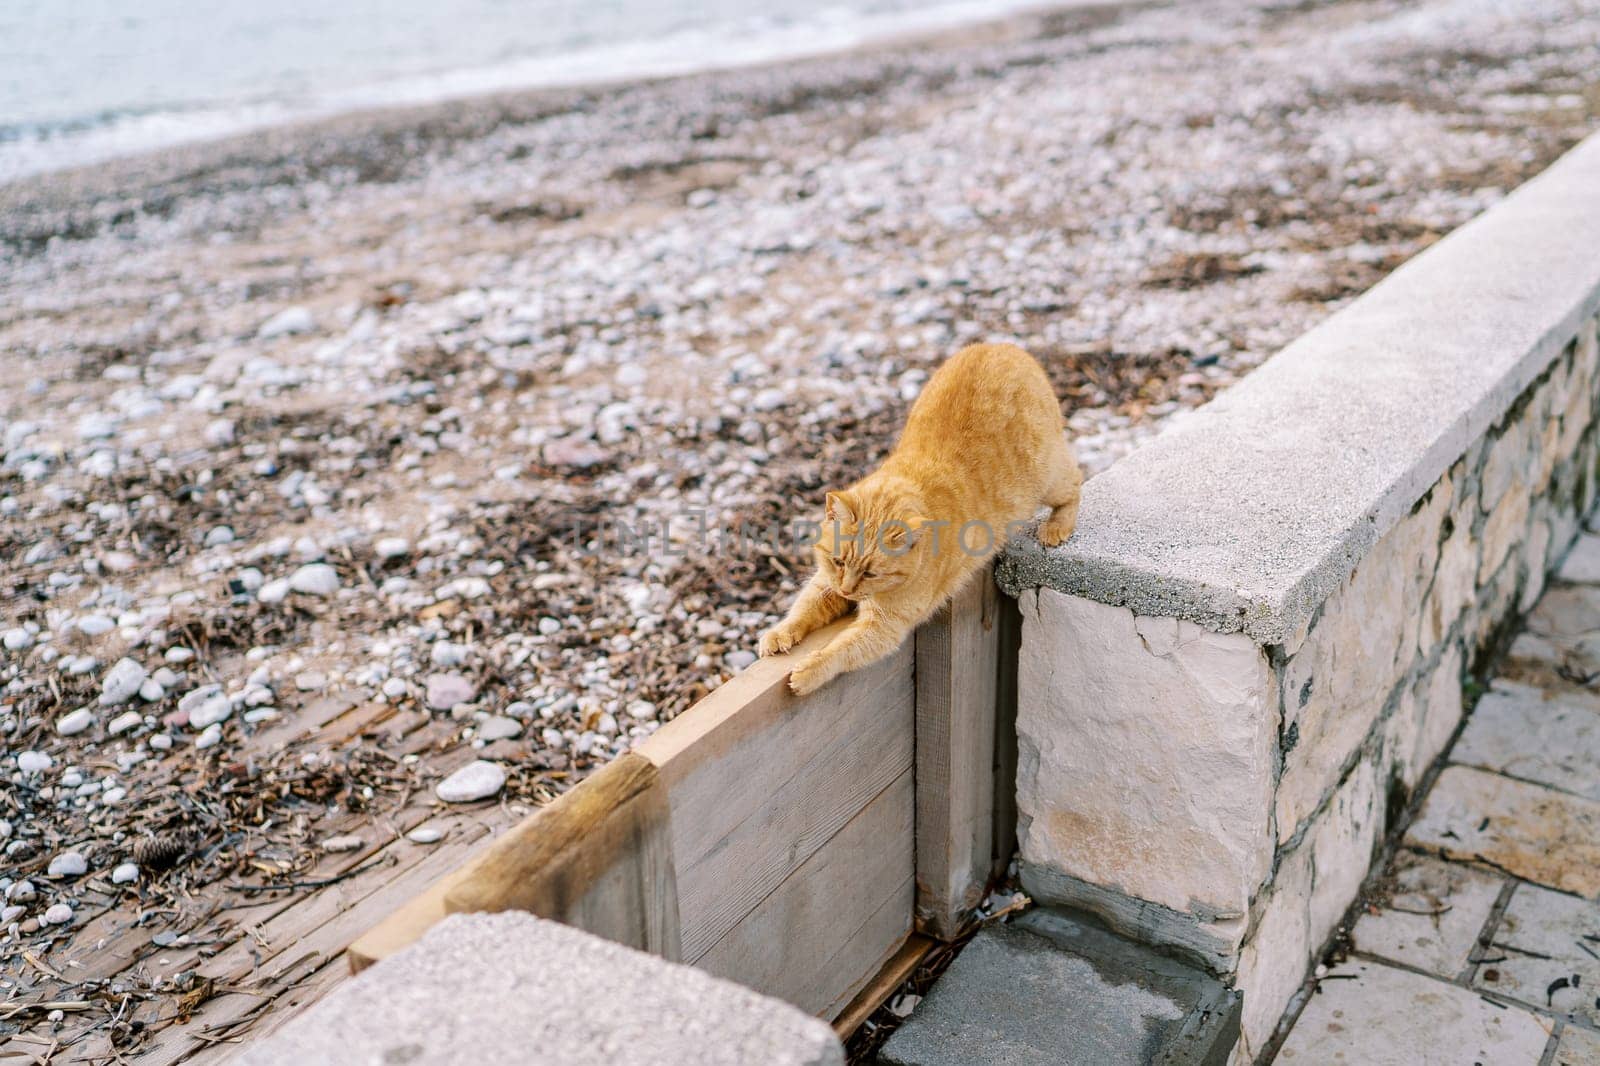 Ginger cat sharpens its claws on a wooden door in a stone fence by the sea. High quality photo